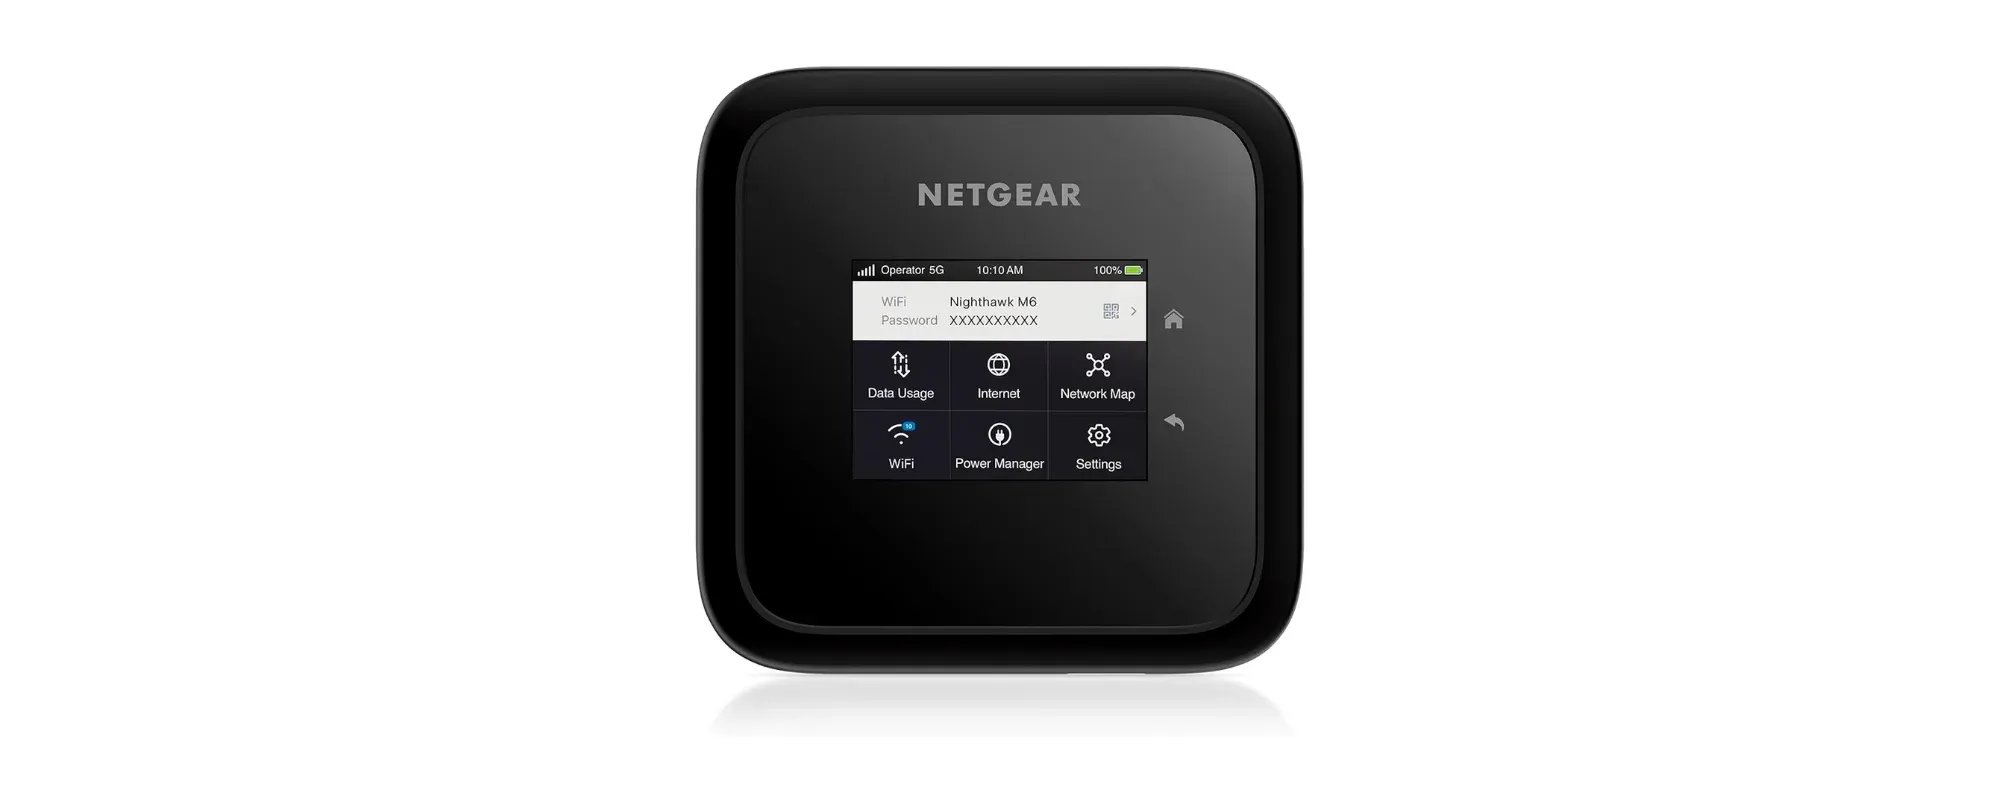 Are you a heavy phone hotspot user? Get this mobile hotspot router